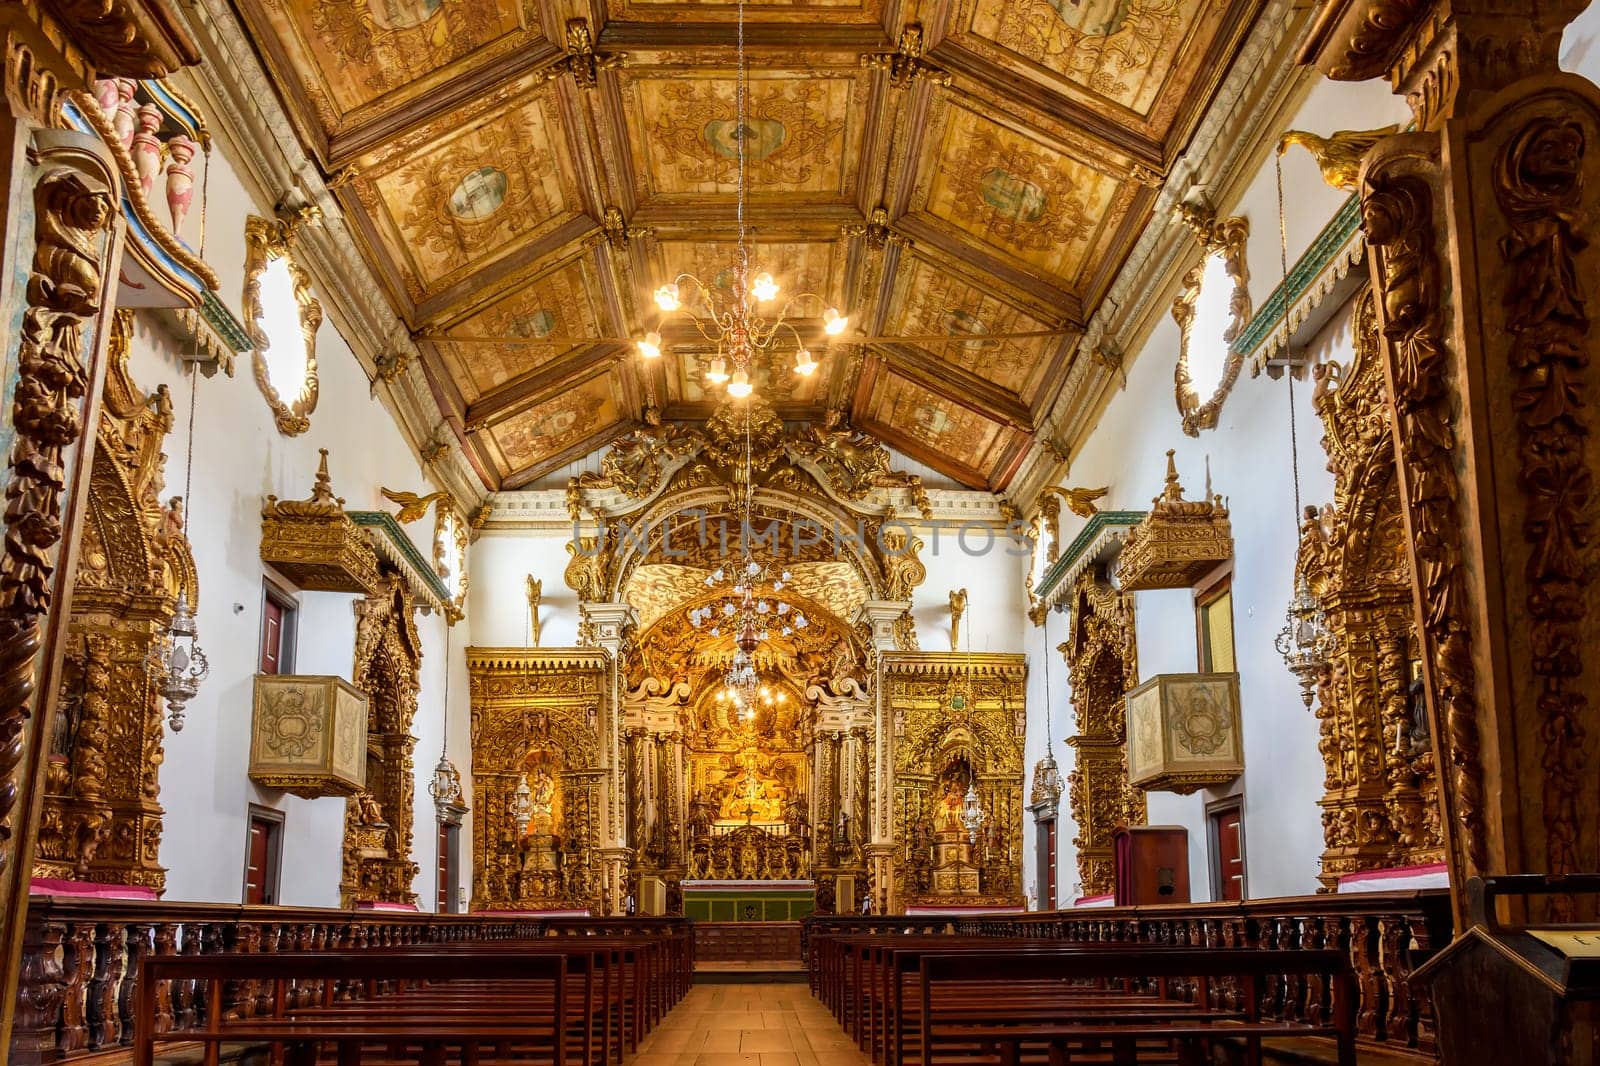 Interior and altar of a brazilian historic ancient church from the 18th century in baroque architecture with details of the walls in gold leaf in the city of Tiradentes, a UNESCO World Heritage Site, Minas Gerais State, Brazil